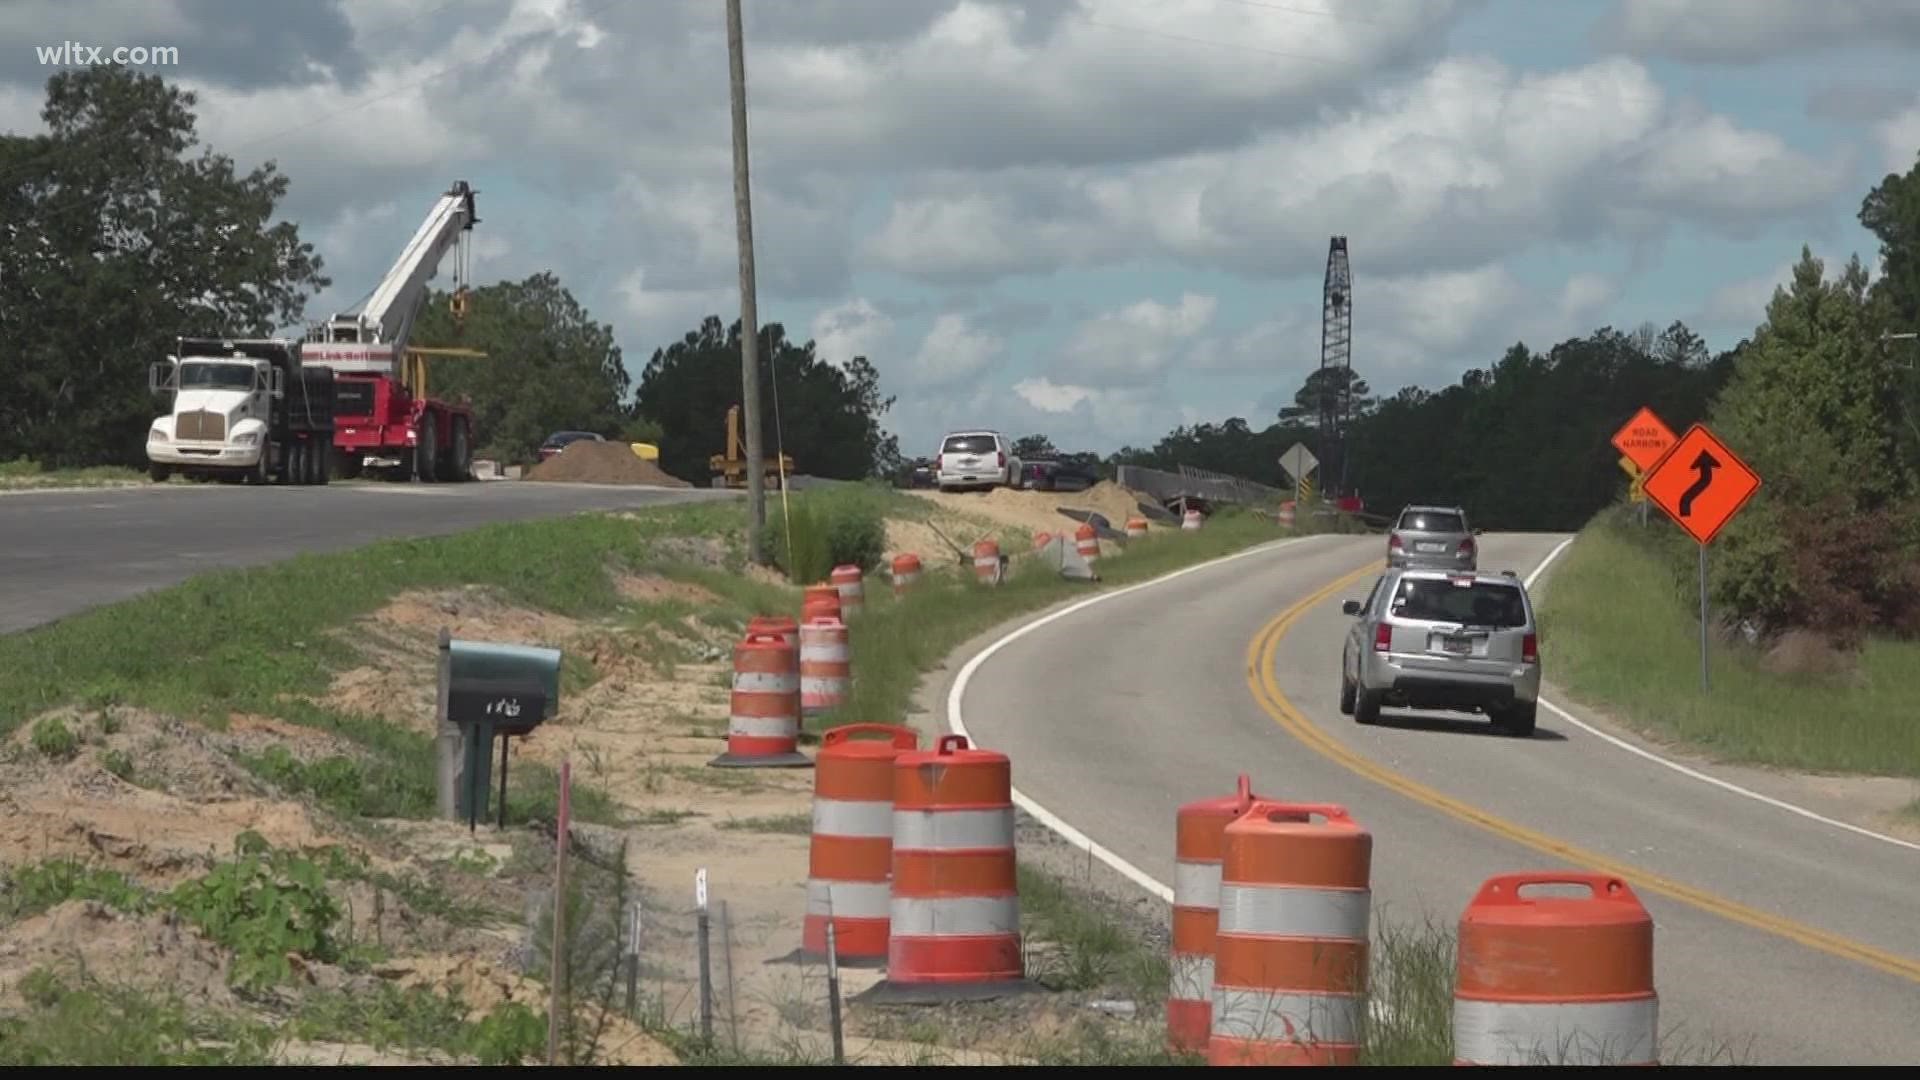 The bridge is being build on Highway 1 in Kershaw County near the town of Bethune.